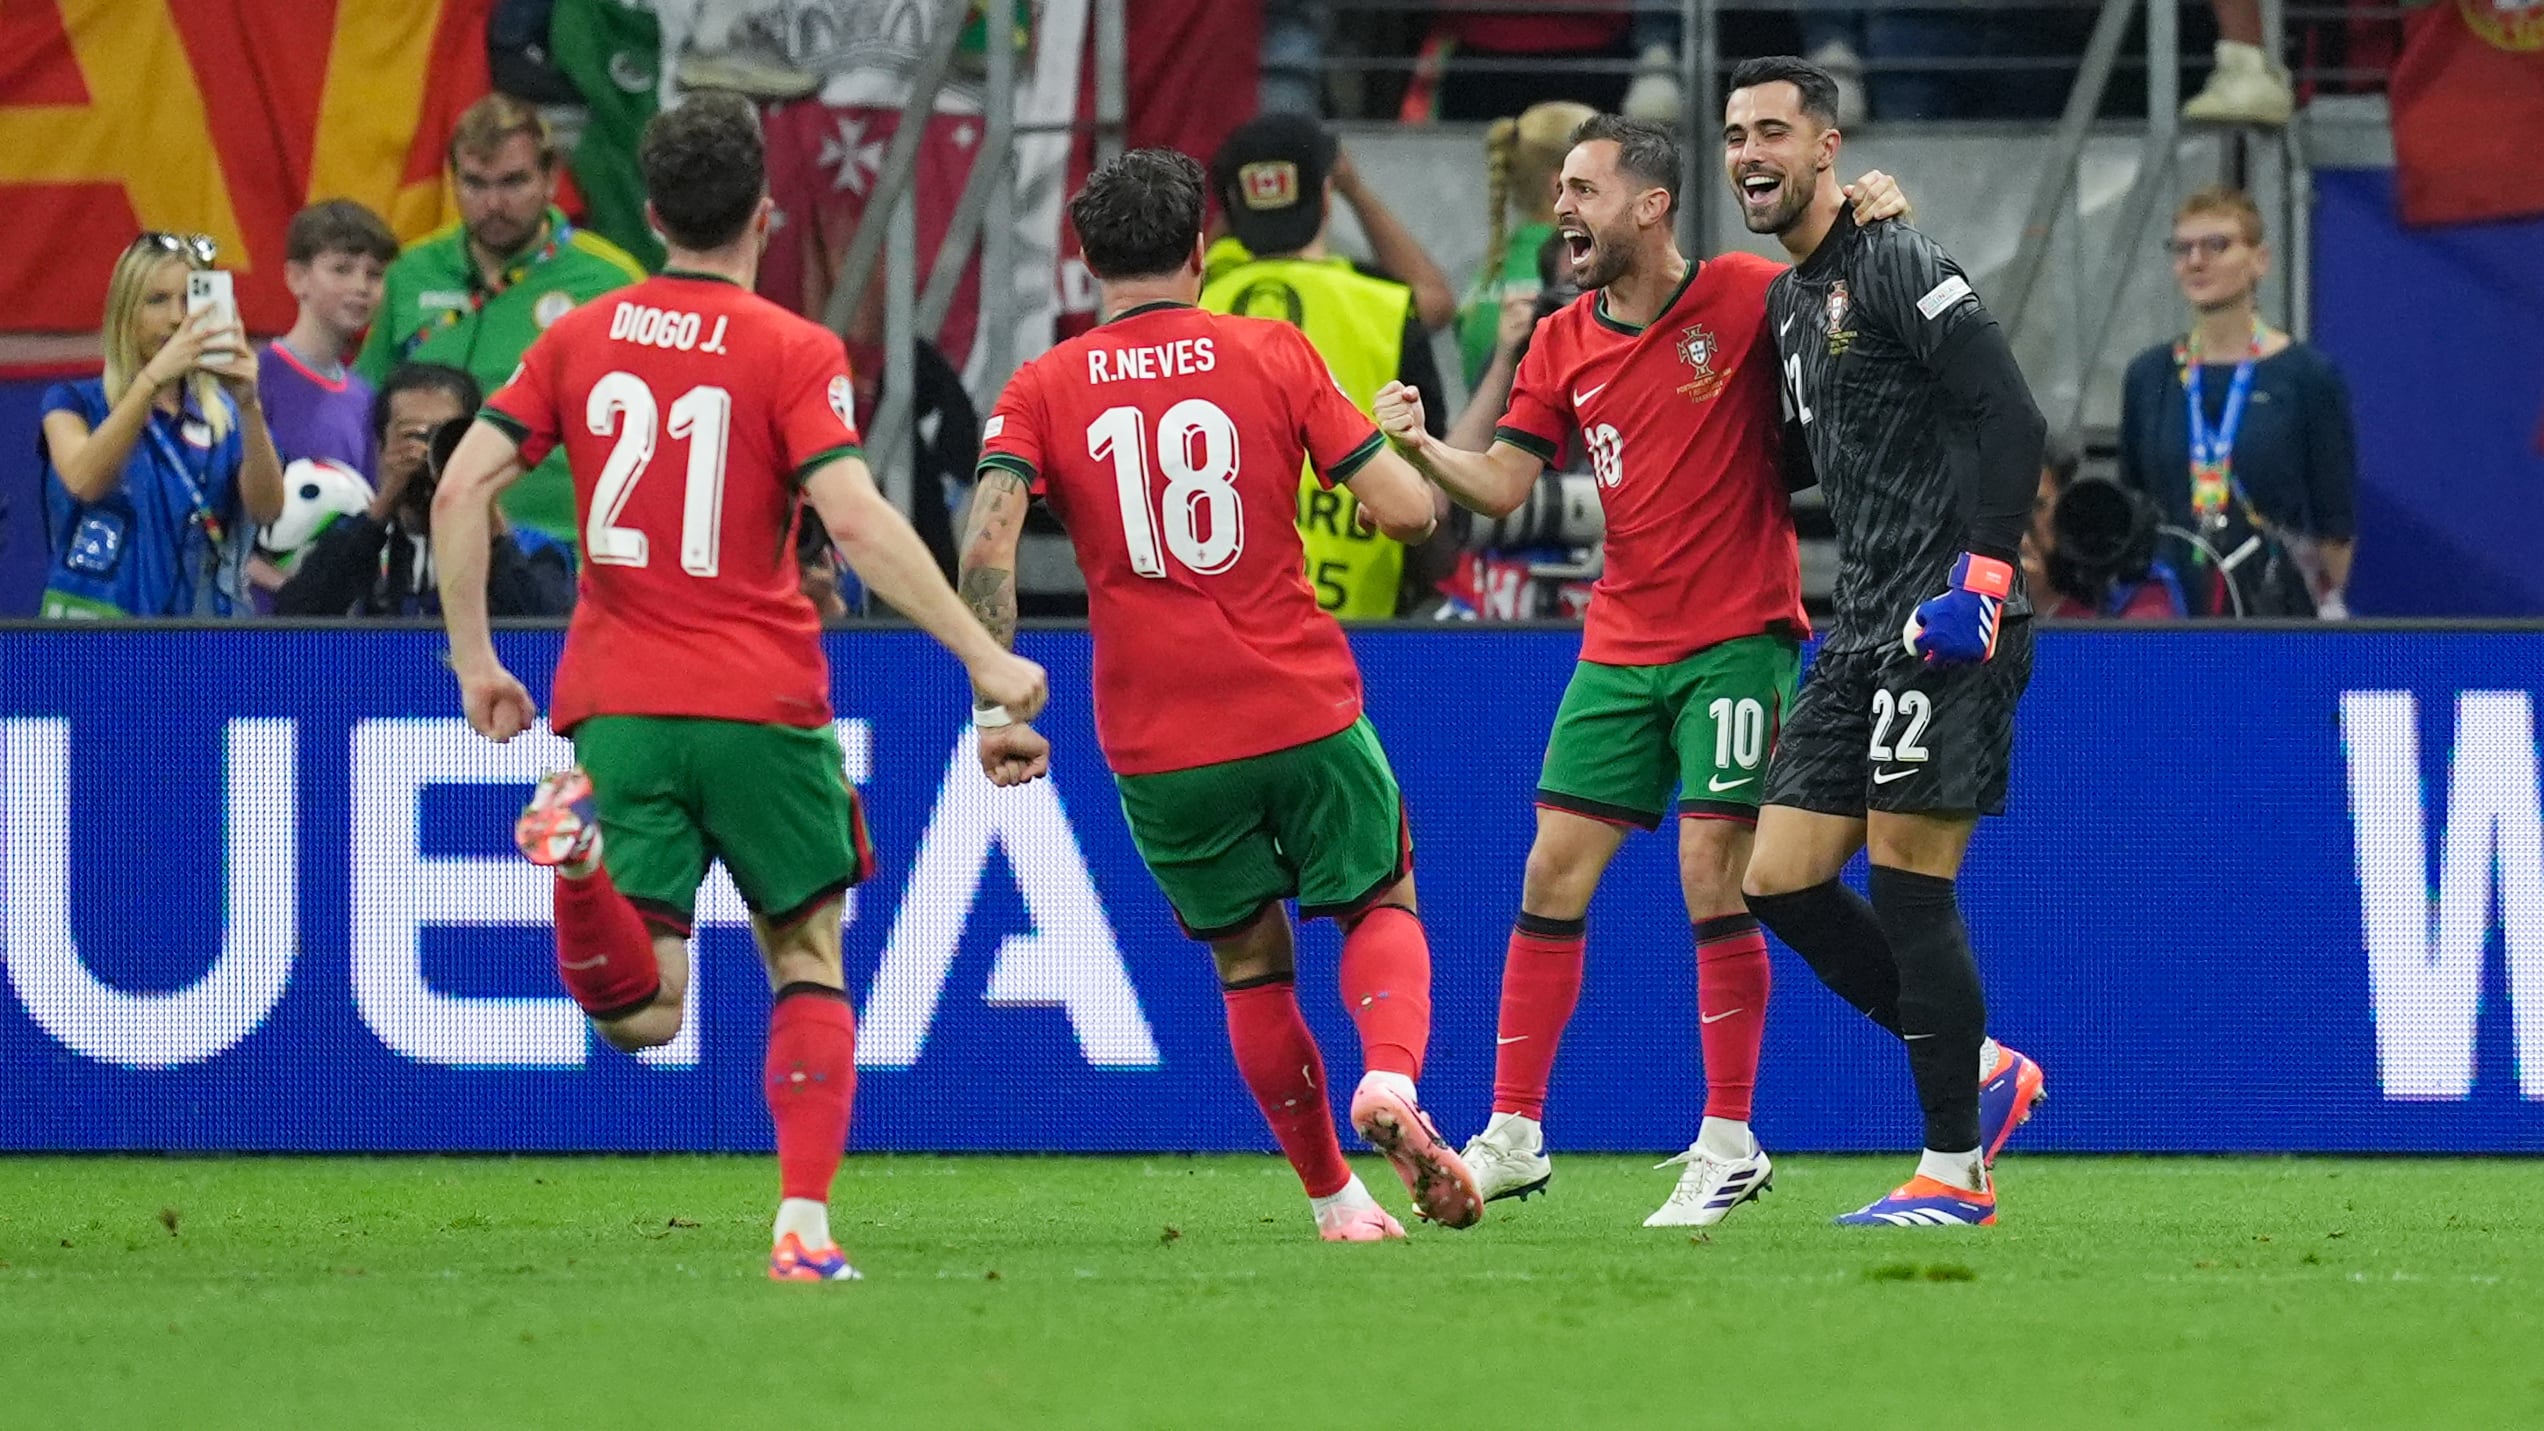 Portugal goalkeeper Diego Costa was the hero with three saves in the shoot-out